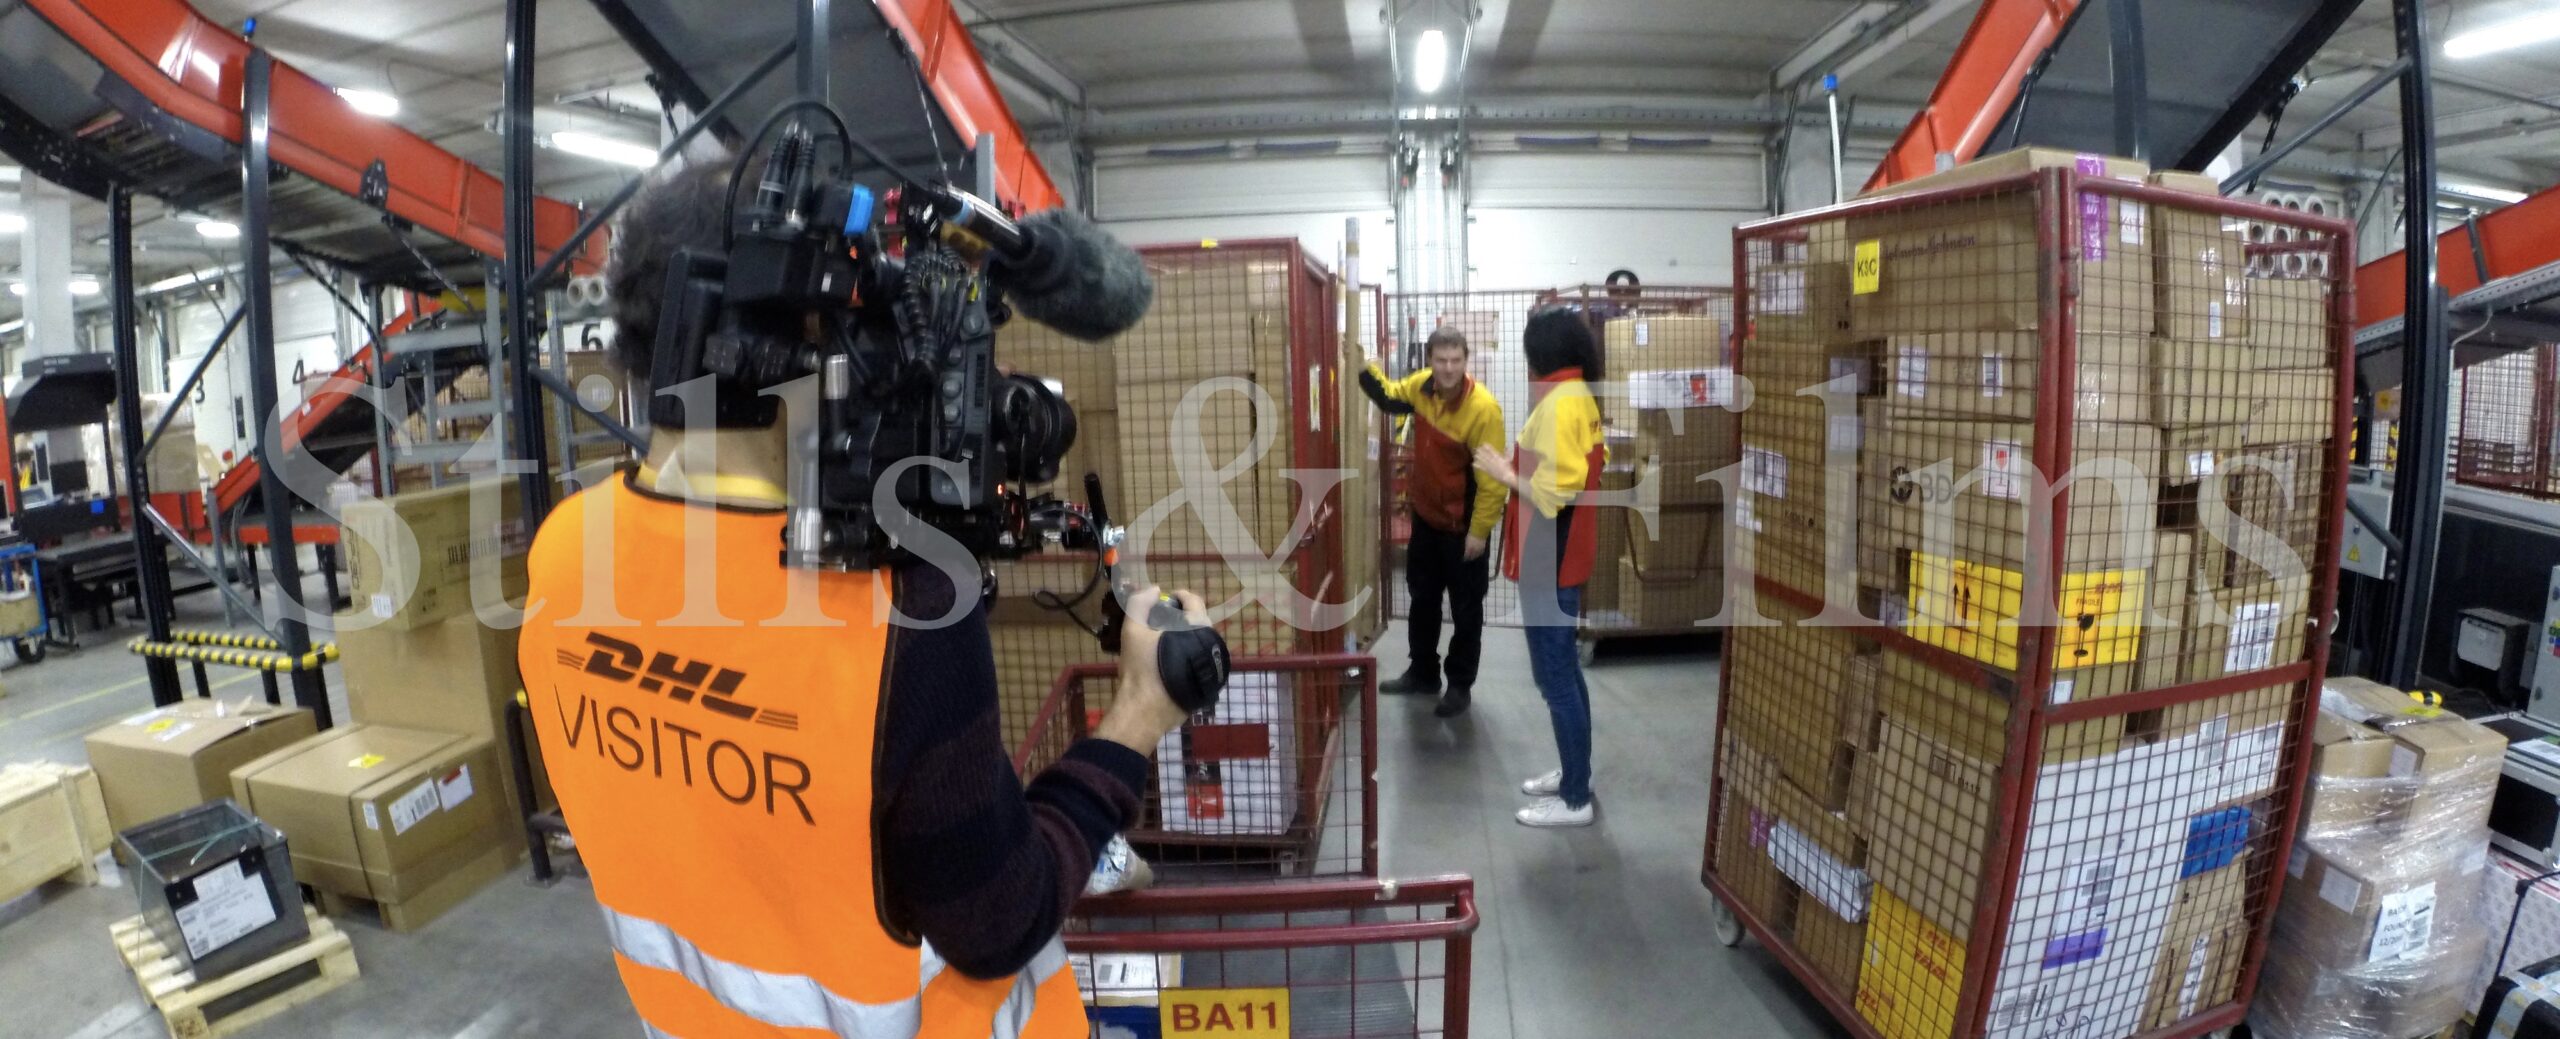 Our local video crew in Bratislava, Slovakia films for DHL